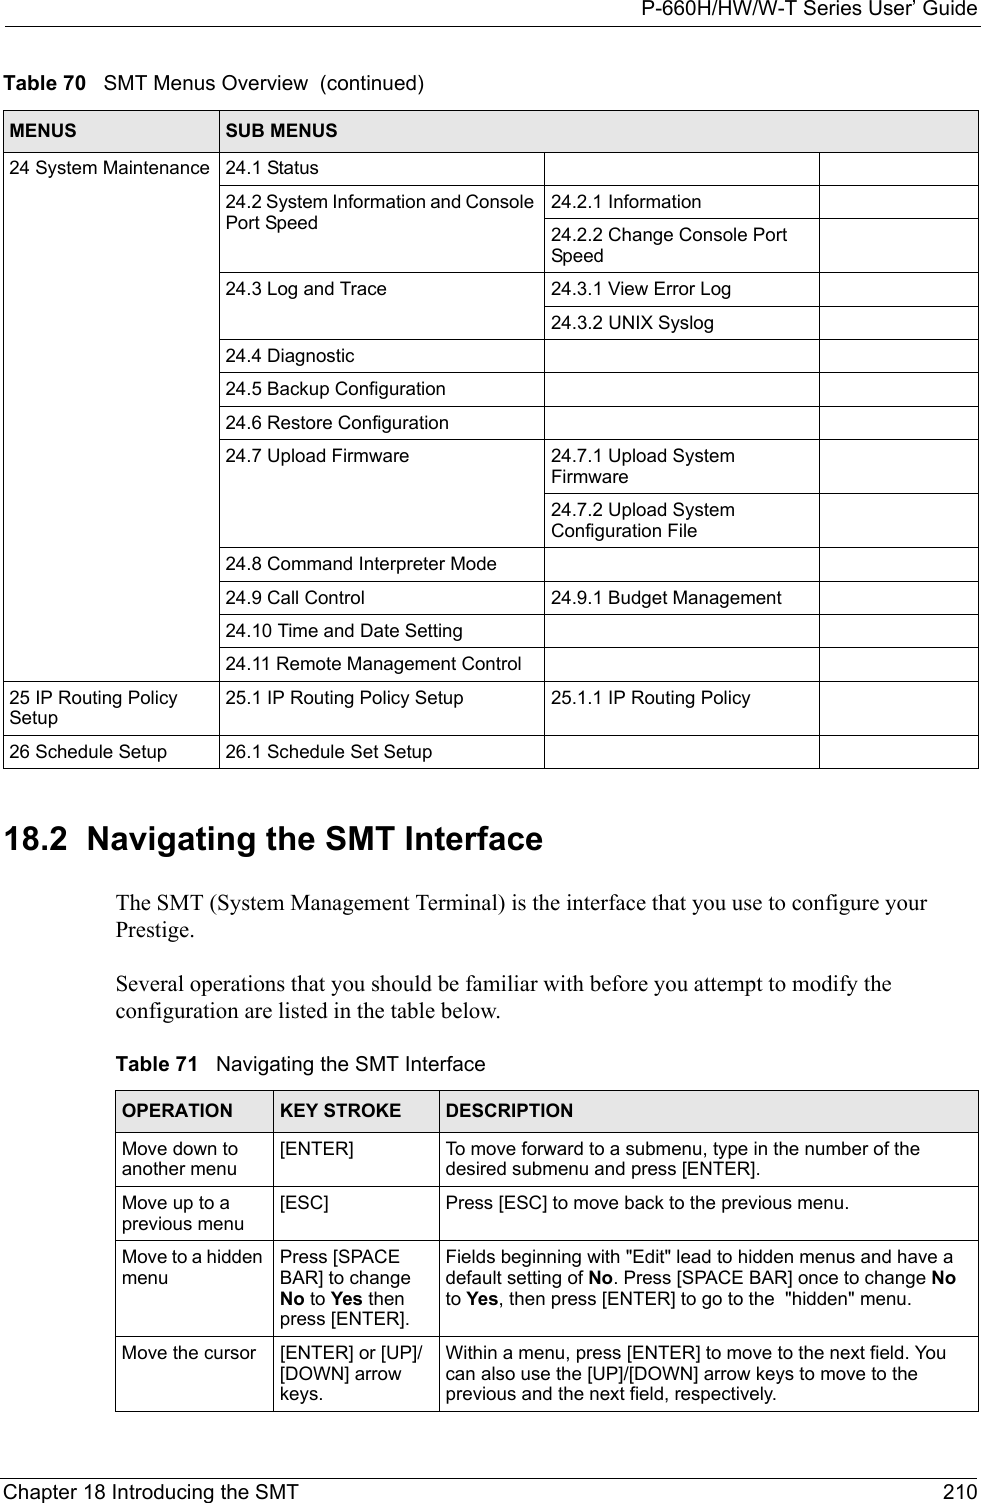 P-660H/HW/W-T Series User’ GuideChapter 18 Introducing the SMT 21018.2  Navigating the SMT InterfaceThe SMT (System Management Terminal) is the interface that you use to configure your Prestige. Several operations that you should be familiar with before you attempt to modify the configuration are listed in the table below.24 System Maintenance 24.1 Status24.2 System Information and Console Port Speed24.2.1 Information24.2.2 Change Console Port Speed24.3 Log and Trace 24.3.1 View Error Log24.3.2 UNIX Syslog24.4 Diagnostic24.5 Backup Configuration24.6 Restore Configuration24.7 Upload Firmware 24.7.1 Upload System Firmware24.7.2 Upload System Configuration File24.8 Command Interpreter Mode24.9 Call Control 24.9.1 Budget Management24.10 Time and Date Setting24.11 Remote Management Control25 IP Routing Policy Setup25.1 IP Routing Policy Setup 25.1.1 IP Routing Policy26 Schedule Setup 26.1 Schedule Set SetupTable 70   SMT Menus Overview  (continued)MENUS SUB MENUSTable 71   Navigating the SMT InterfaceOPERATION KEY STROKE DESCRIPTIONMove down to another menu[ENTER] To move forward to a submenu, type in the number of the desired submenu and press [ENTER].Move up to a previous menu[ESC] Press [ESC] to move back to the previous menu.Move to a hidden menuPress [SPACE BAR] to change No to Yes then press [ENTER].Fields beginning with &quot;Edit&quot; lead to hidden menus and have a default setting of No. Press [SPACE BAR] once to change No to Yes, then press [ENTER] to go to the  &quot;hidden&quot; menu.Move the cursor [ENTER] or [UP]/[DOWN] arrow keys.Within a menu, press [ENTER] to move to the next field. You can also use the [UP]/[DOWN] arrow keys to move to the previous and the next field, respectively.